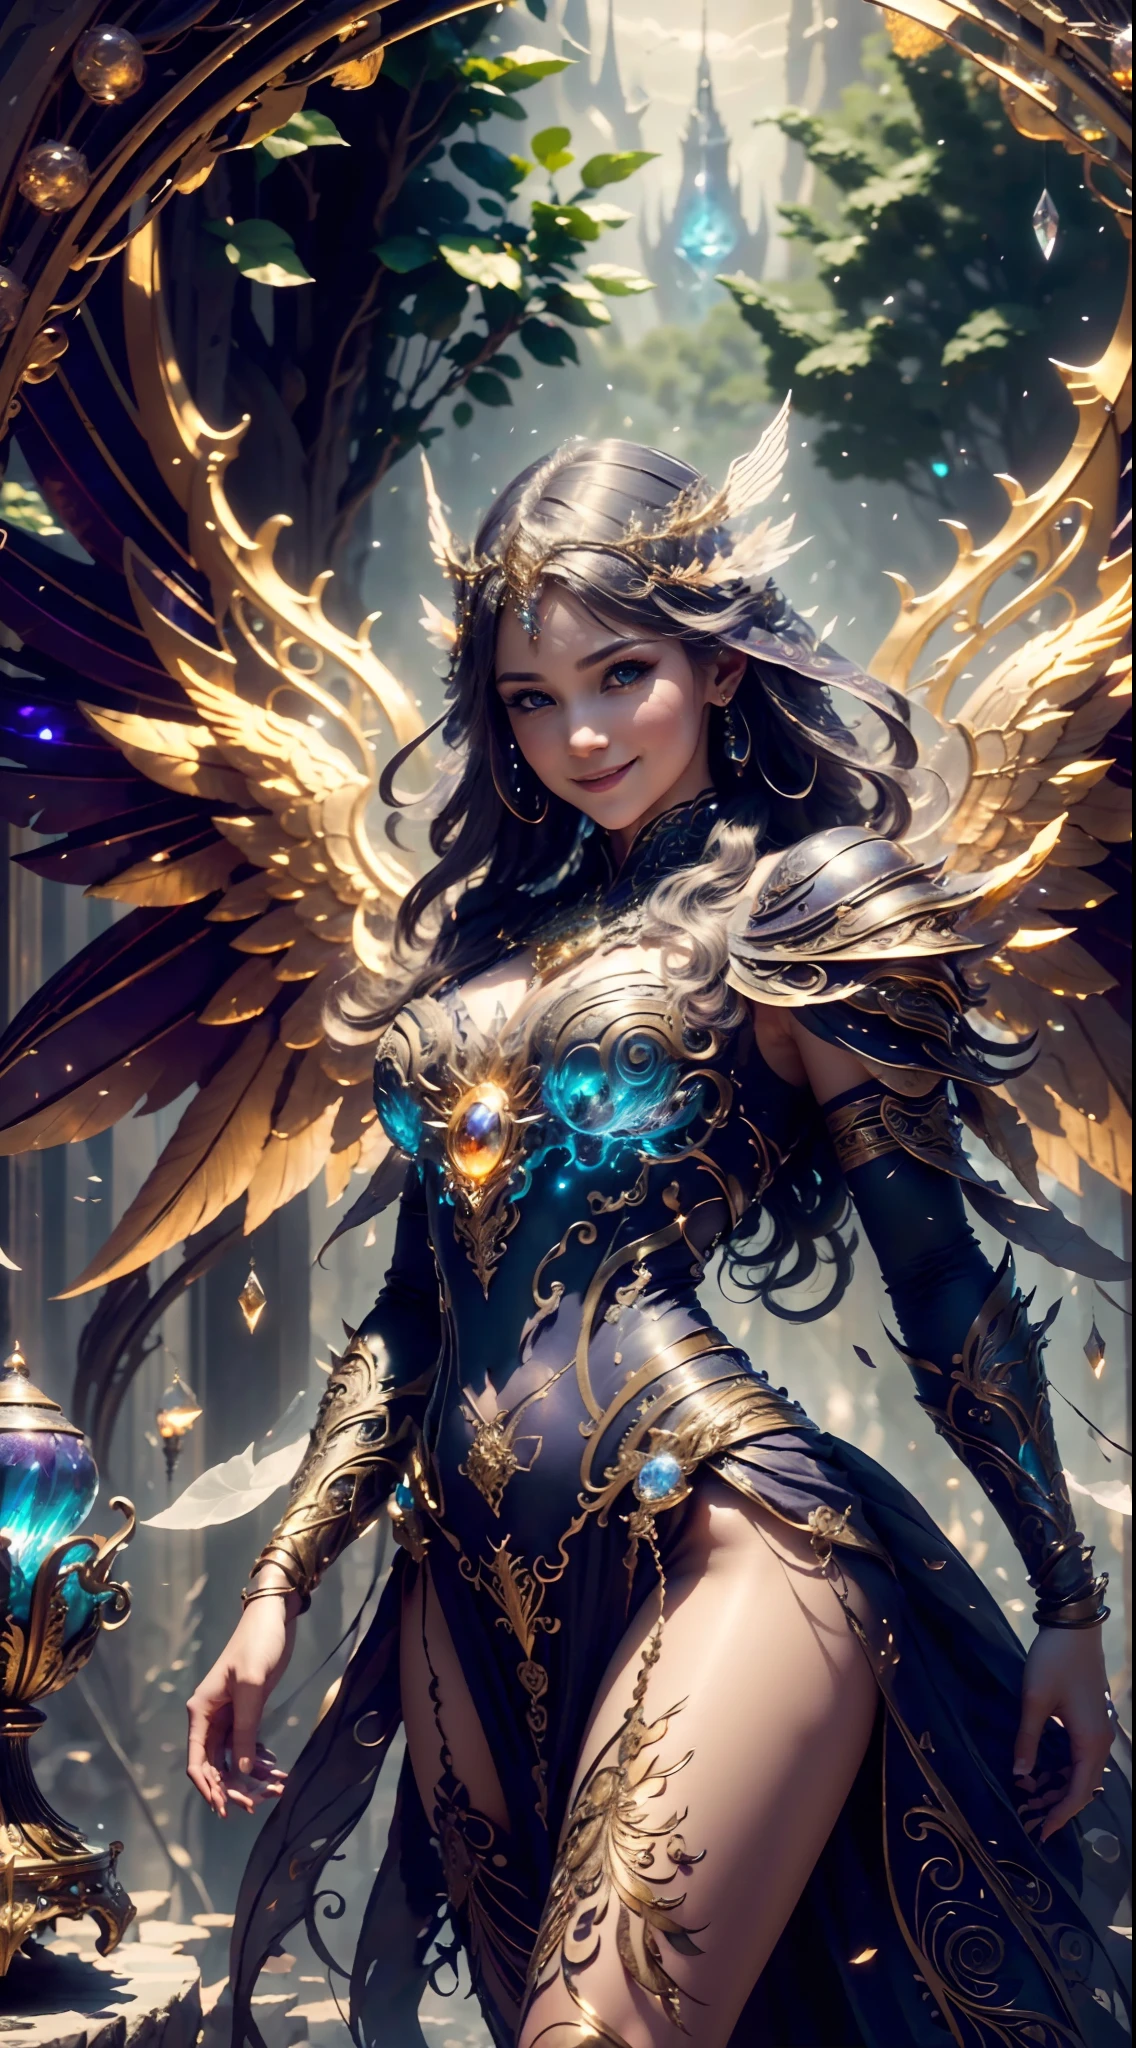 (Cinematic Photo:1.3) from (Realistic:1.3), (Smile:1.3) (Cinematic Photo:1.3) from (Realistic:1.3), (Magic Photo:1.3) from (Realistic:1.3), (Proud:1.3),  female mirror angel, angel wings, Intricate Surface Detail, Crystal Core, Bejeweled, Delicate close-up dress, Highly detailed fantasy character, Stunning community, Intricate décor, Detailed fantasy digital art, cgsociety 9, behance fantasy art, 4k detail  fantasy, detailed fantasy art, 8k high quality detail art, cgociety, Sparklecore, Hyperrealistic, Dreamlike, Ethereal Fantasy, Realistic, Fiction, Full-HD, HD, 8K, Soft Lighting, Beautiful Lighting, Incredibly Detailed, Naturalism, Land art, regionalism  , shutterstock contest winner, (zentangle:1.2), (random background:1.5), (shot with Nikon D7500 with Nikon 18-300mm lens, 1/0, f/6.3, ISO800),